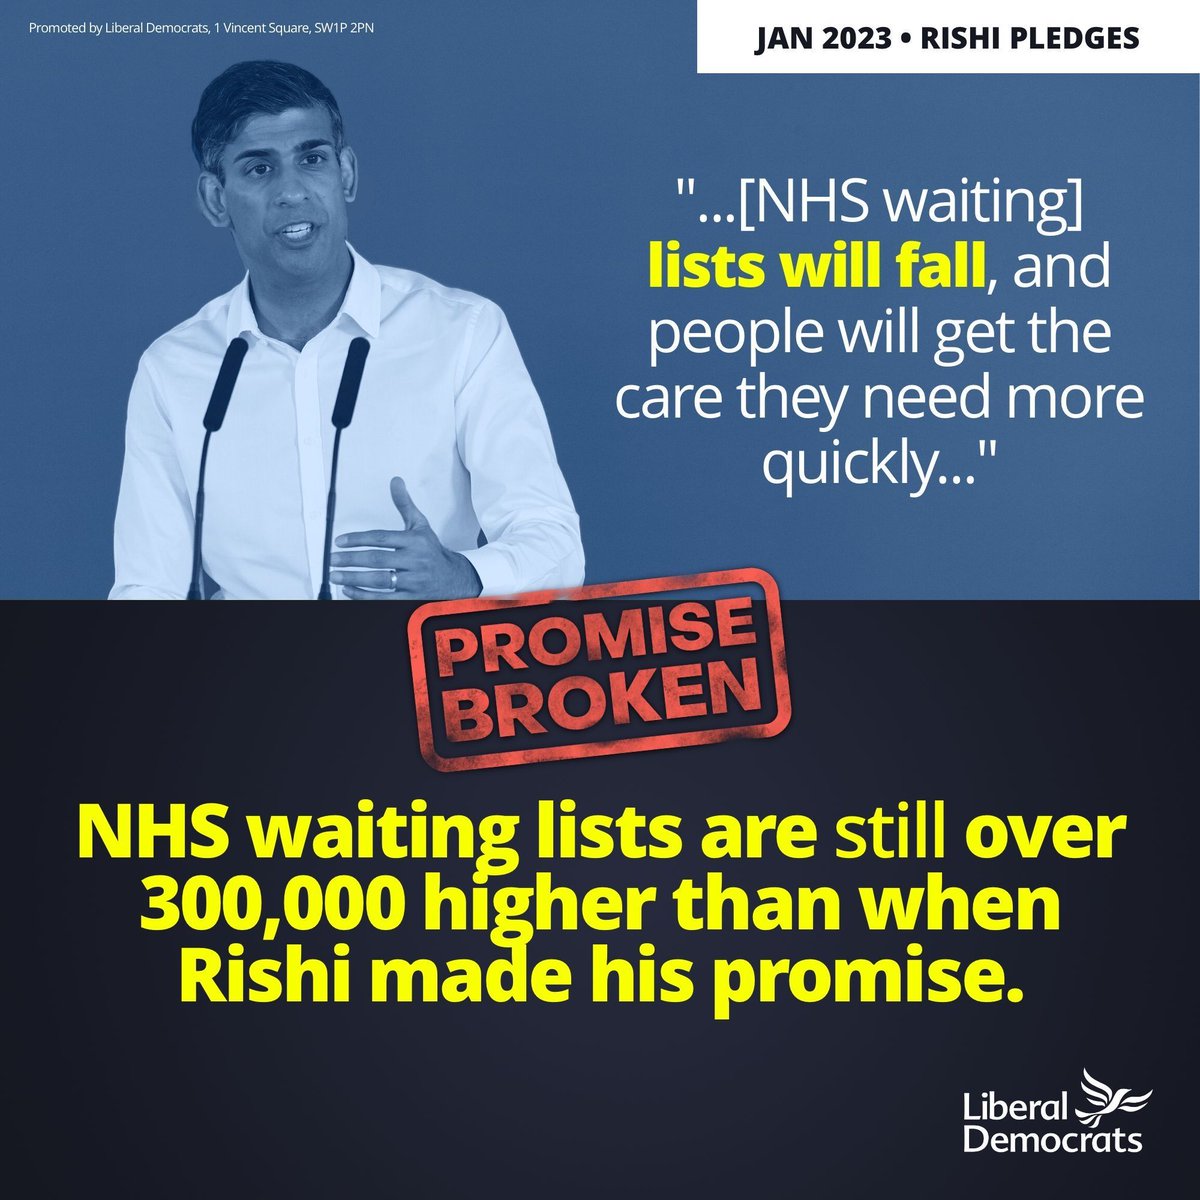 A promise made. A promise broken. It's clear to see: the Conservatives are bad for our nation's health.